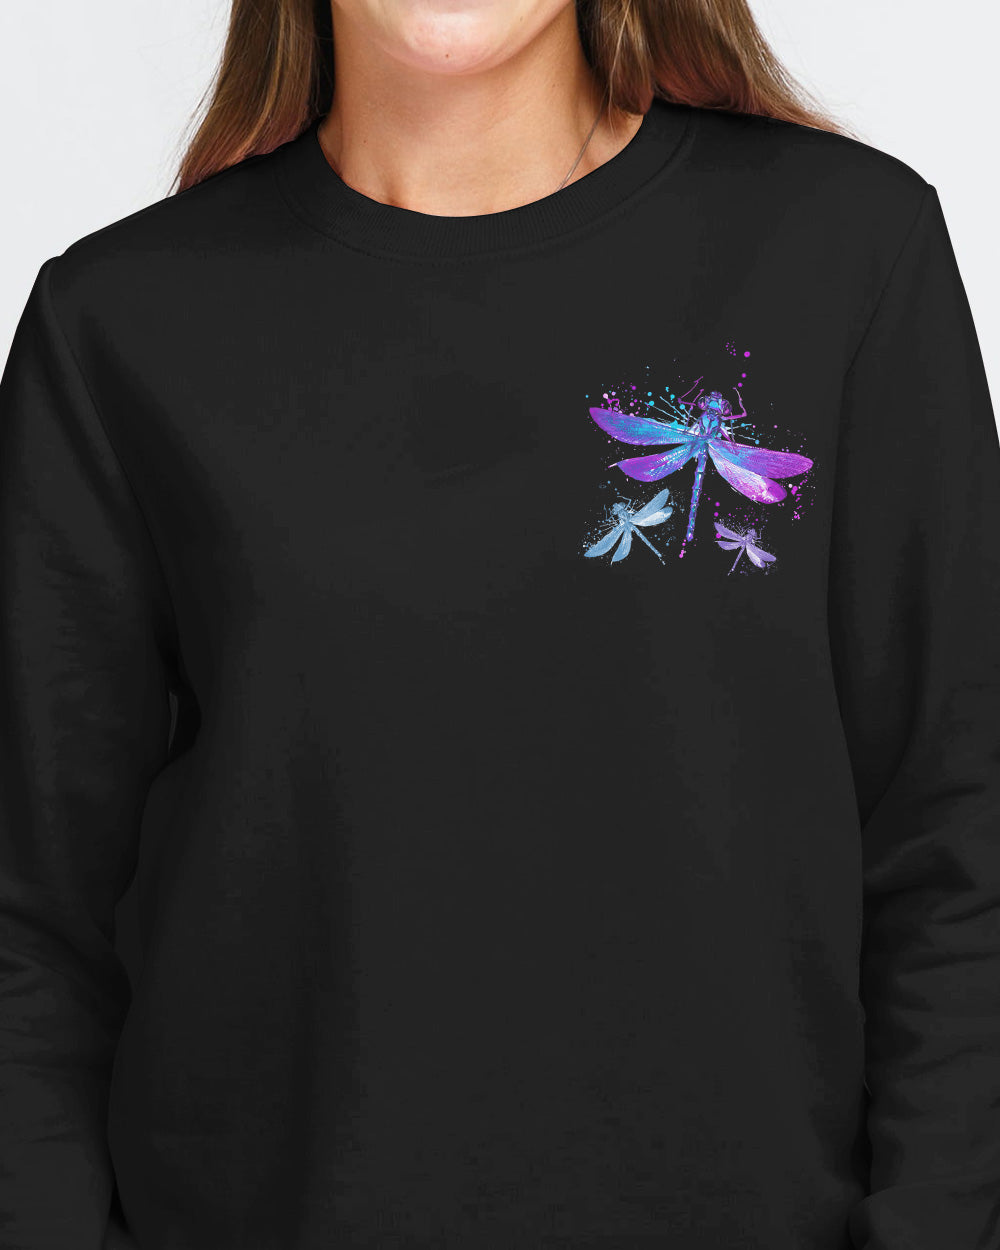 May There Be An Angel By Your Side Dragonfly Watercolor Women's Christian Sweatshirt